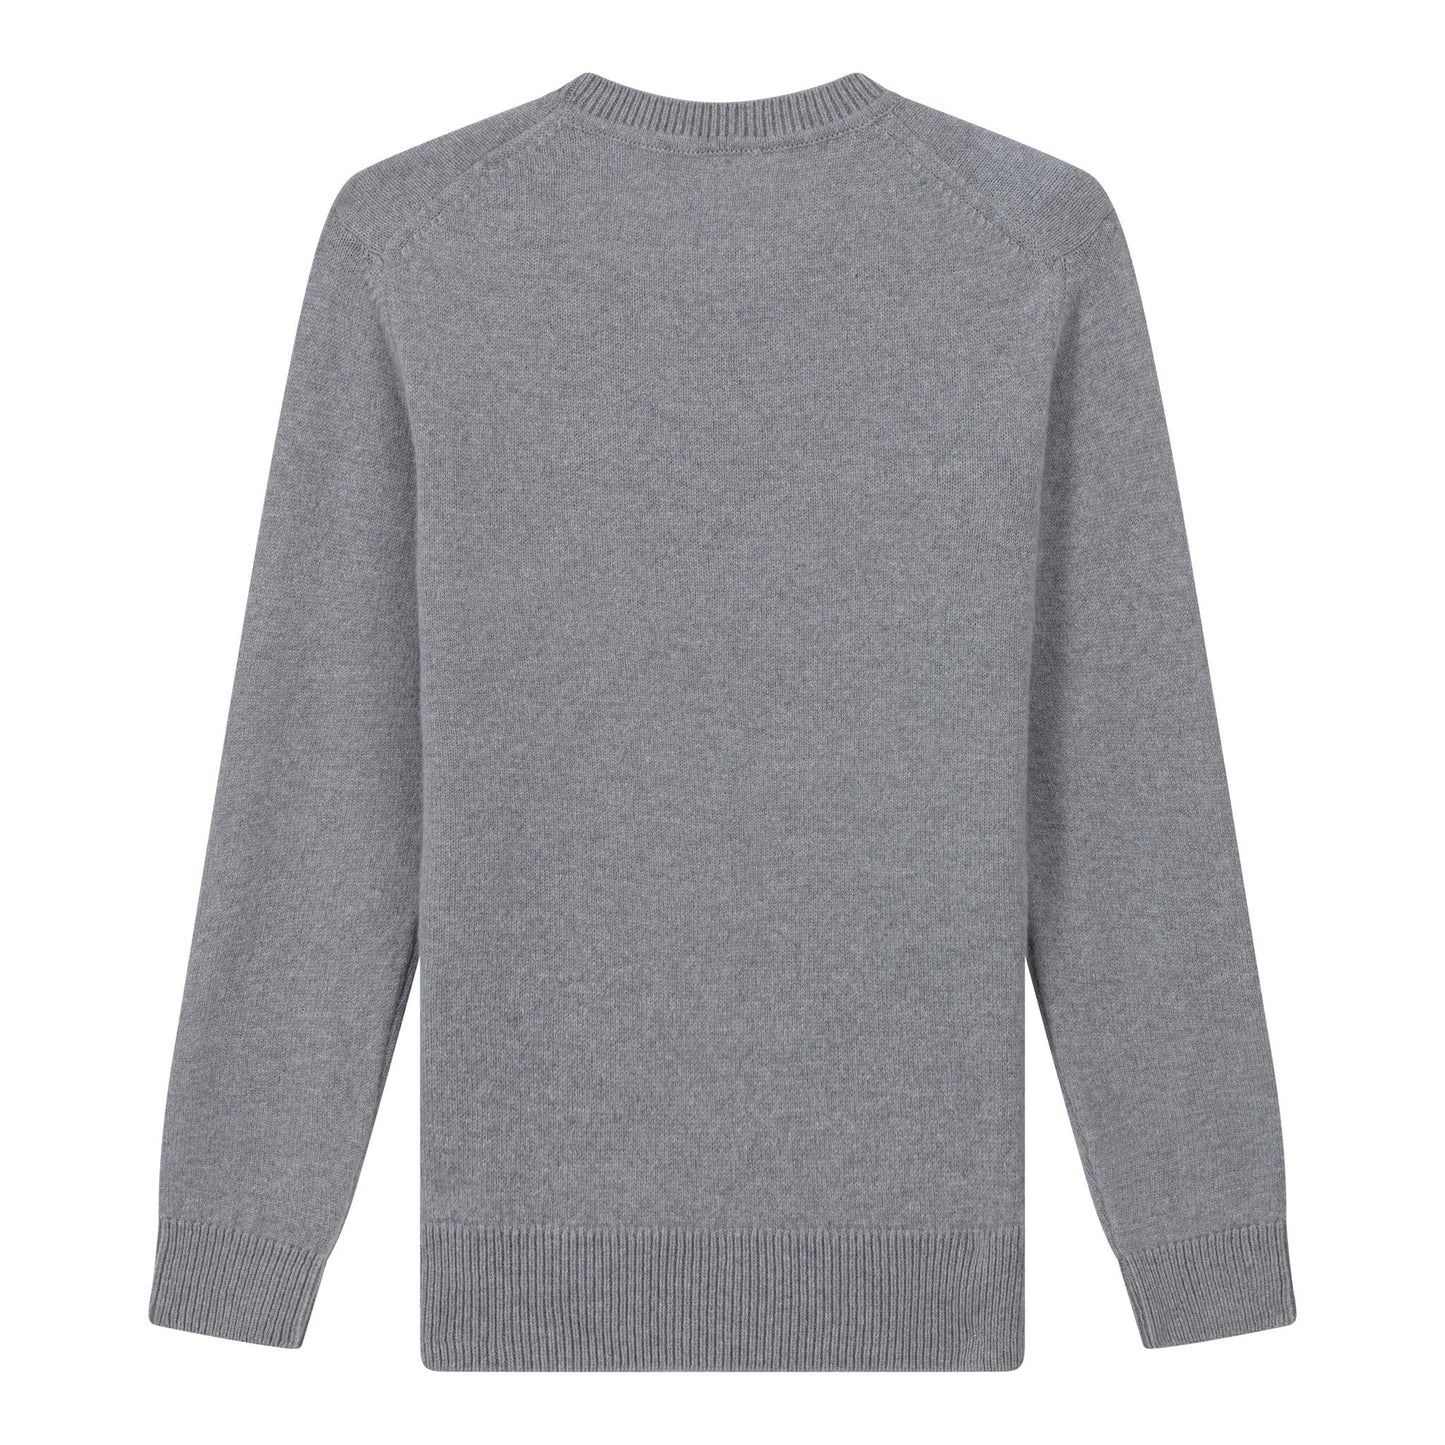 Pull Lambswool Gris clair - Champ de Manoeuvres 